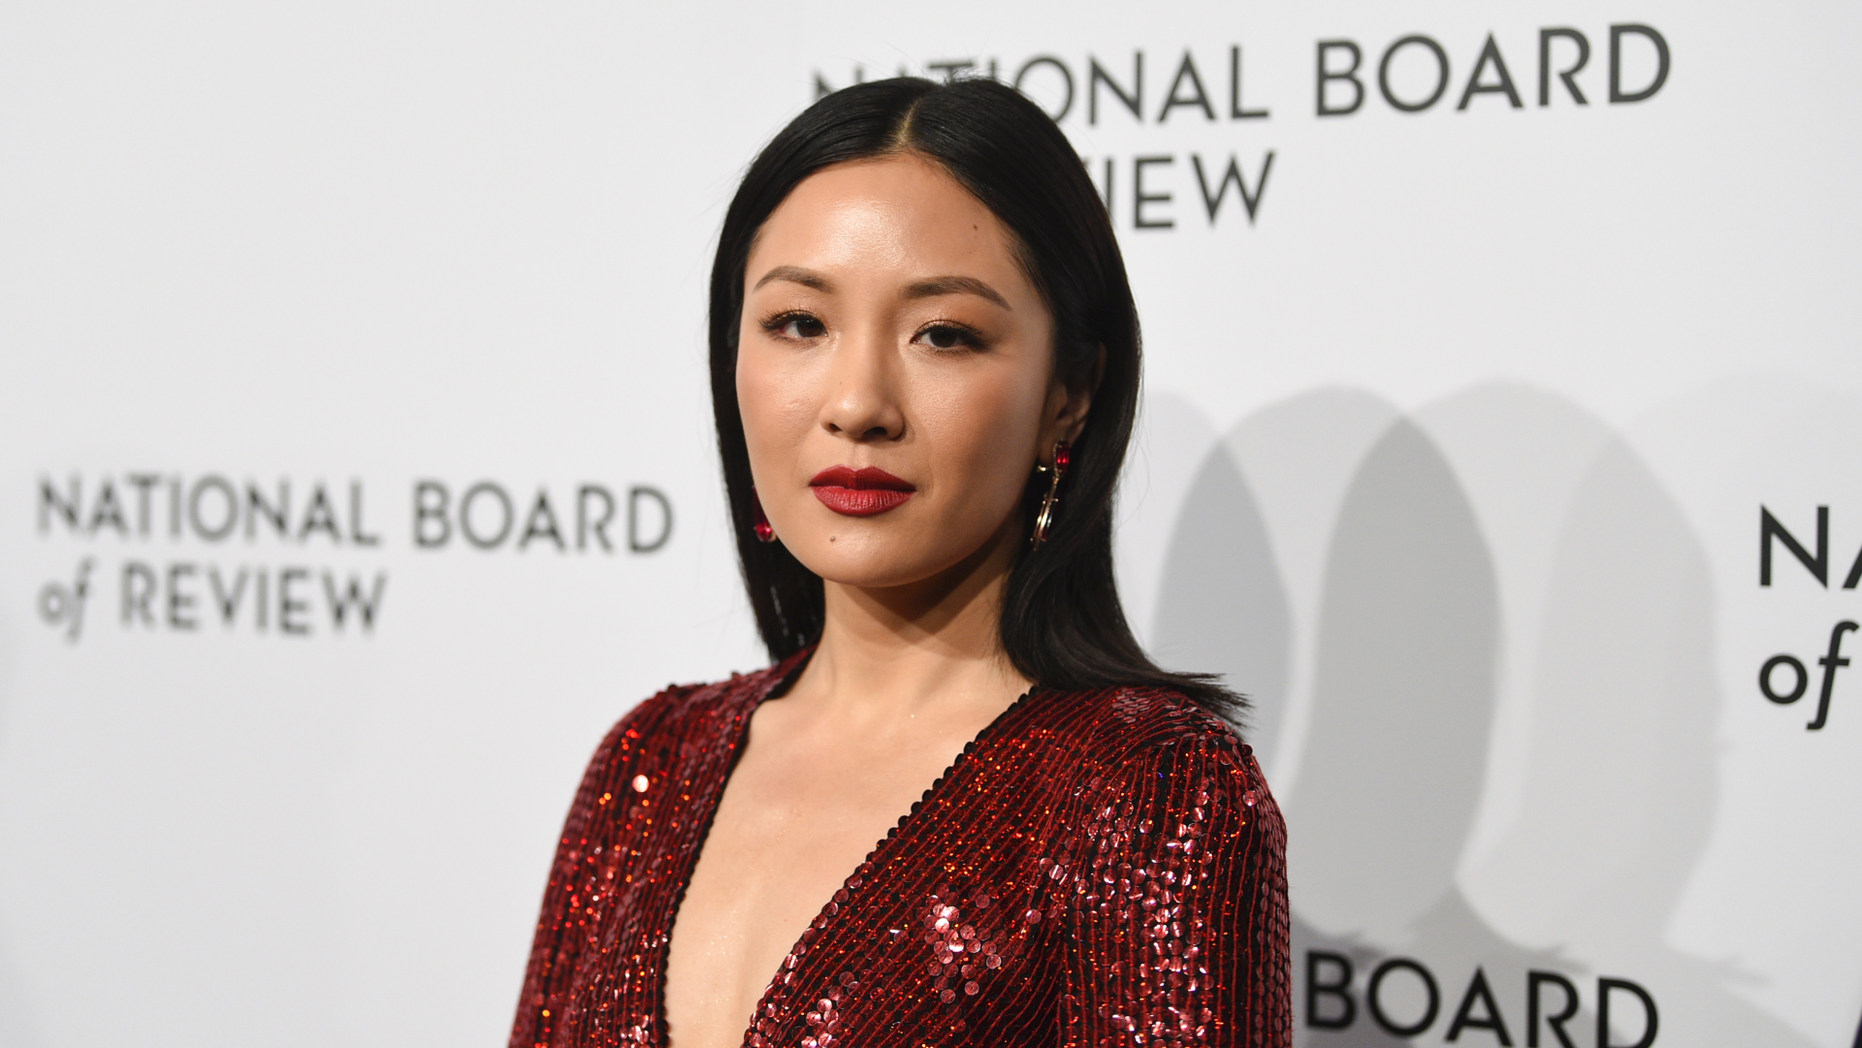 Constance Wu seemed unhappy with her sitcom ABC 